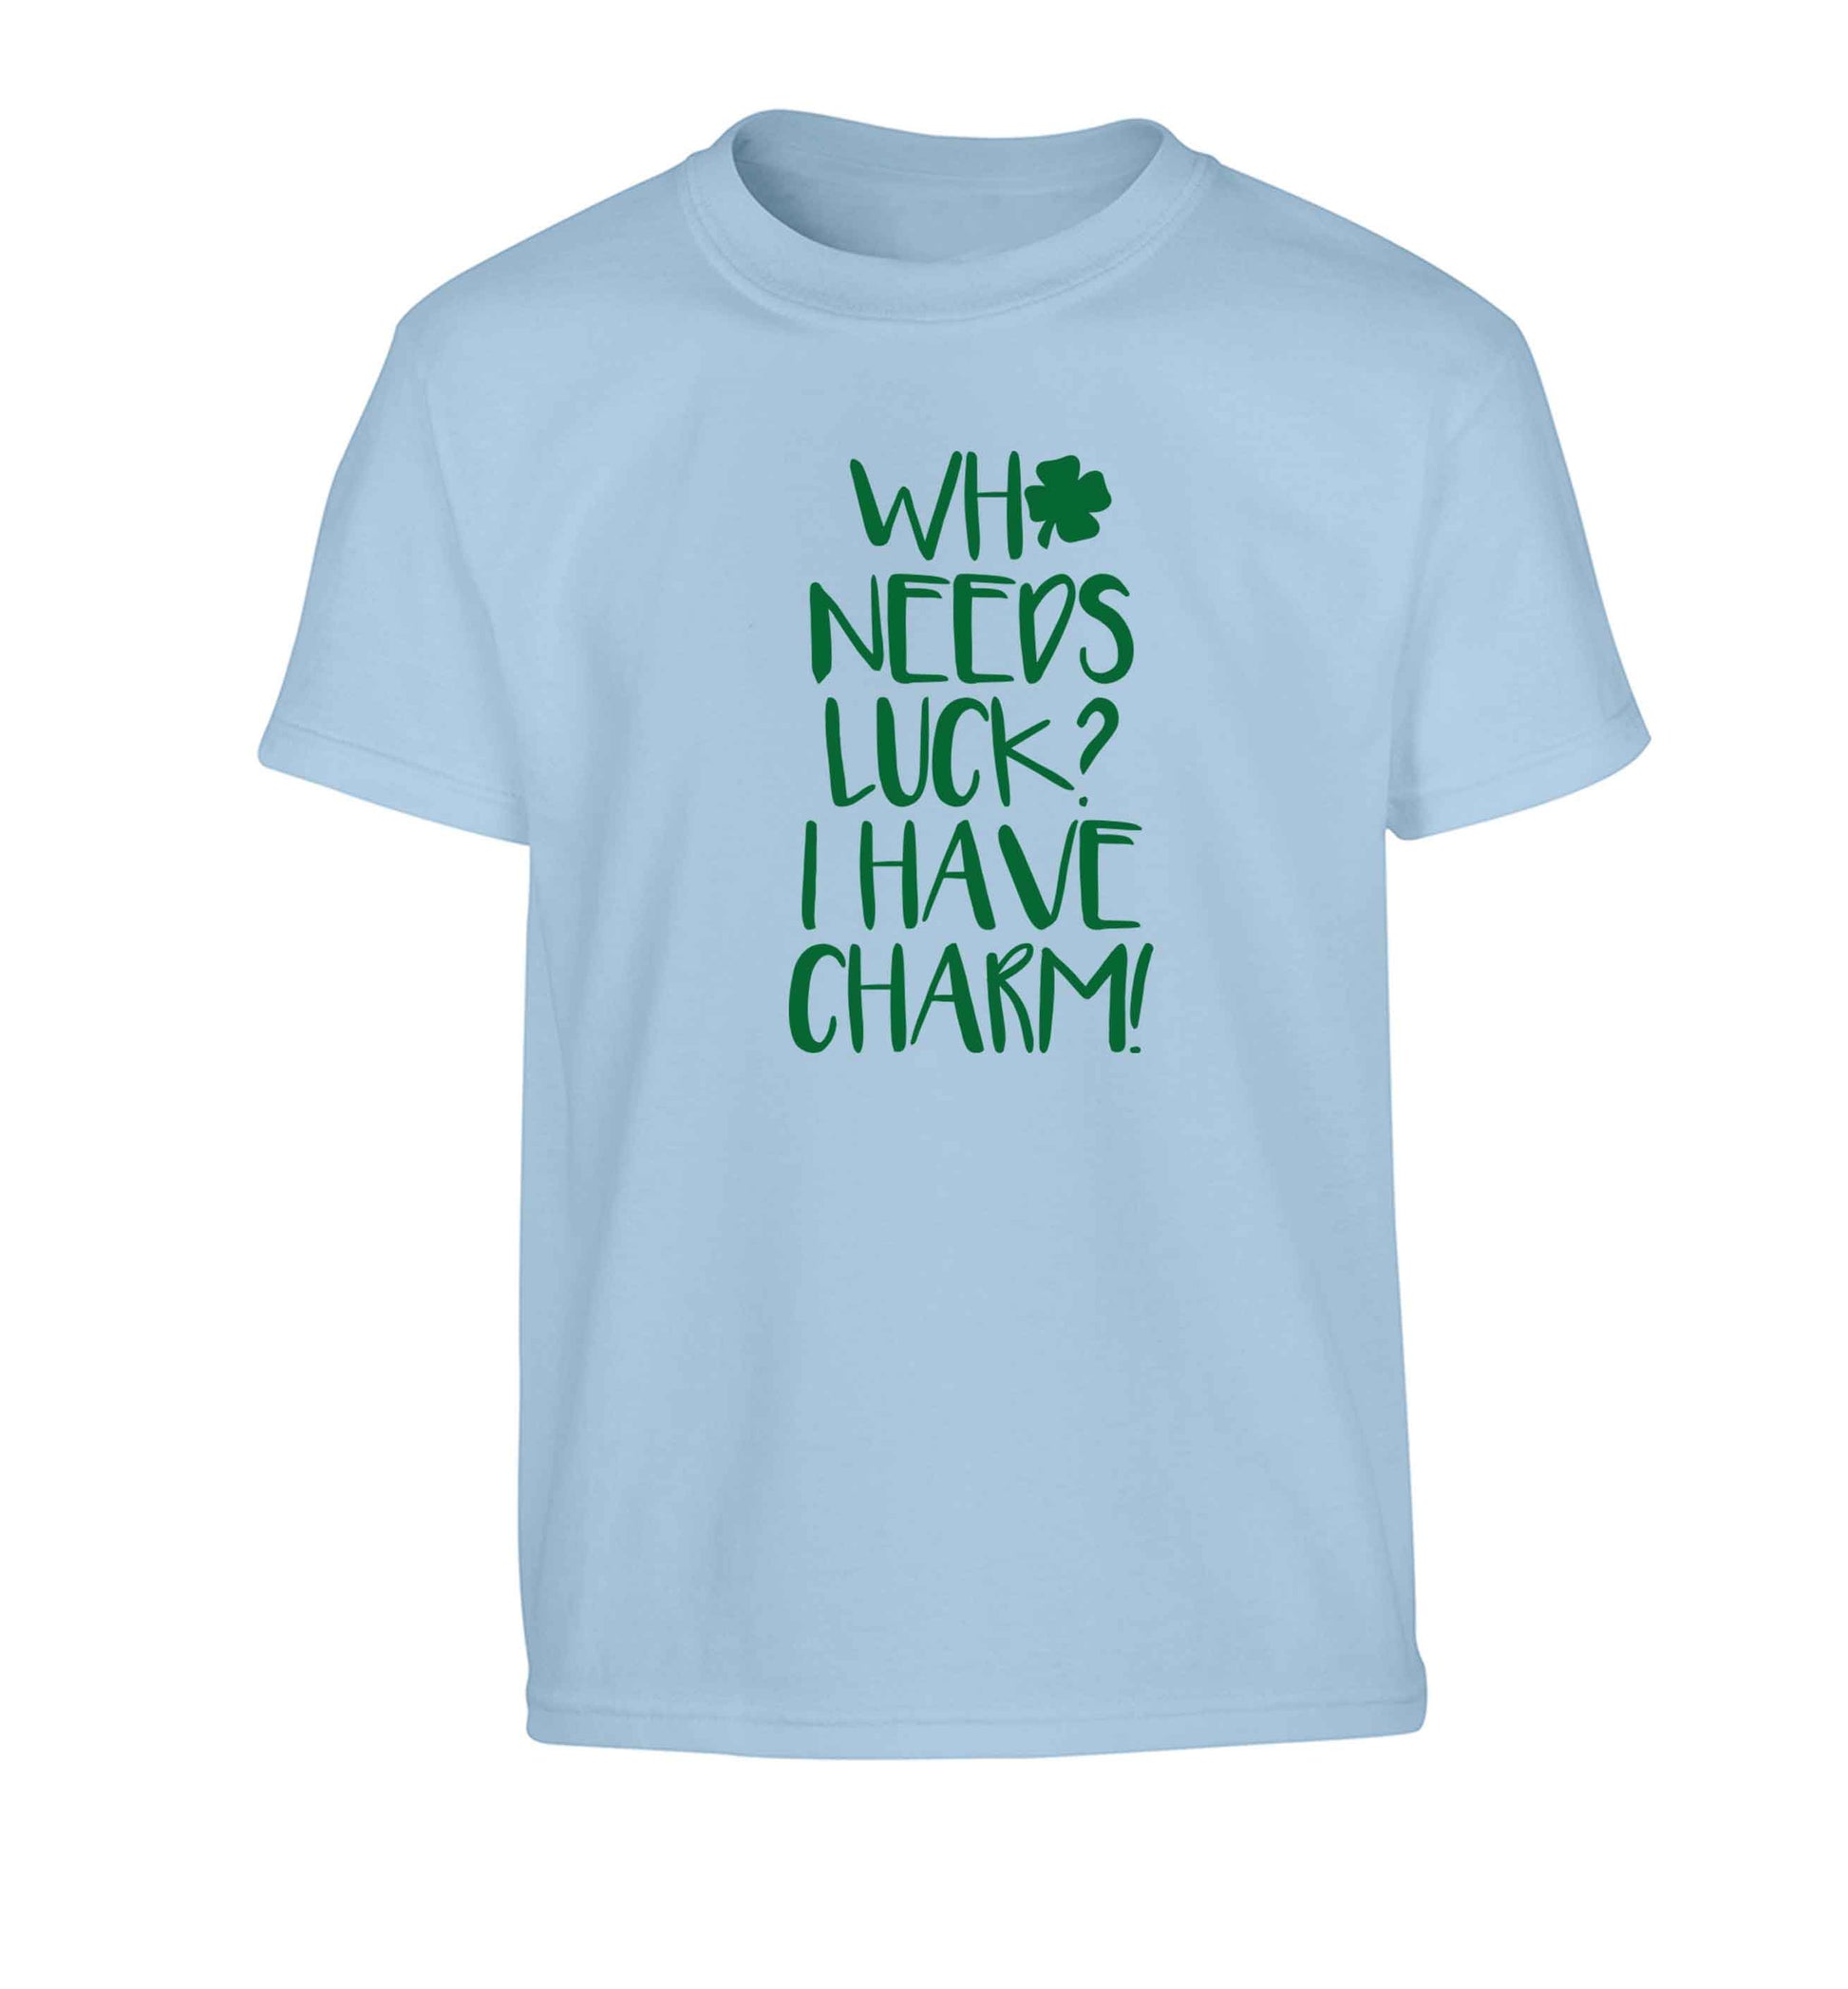 Who needs luck? I have charm! Children's light blue Tshirt 12-13 Years